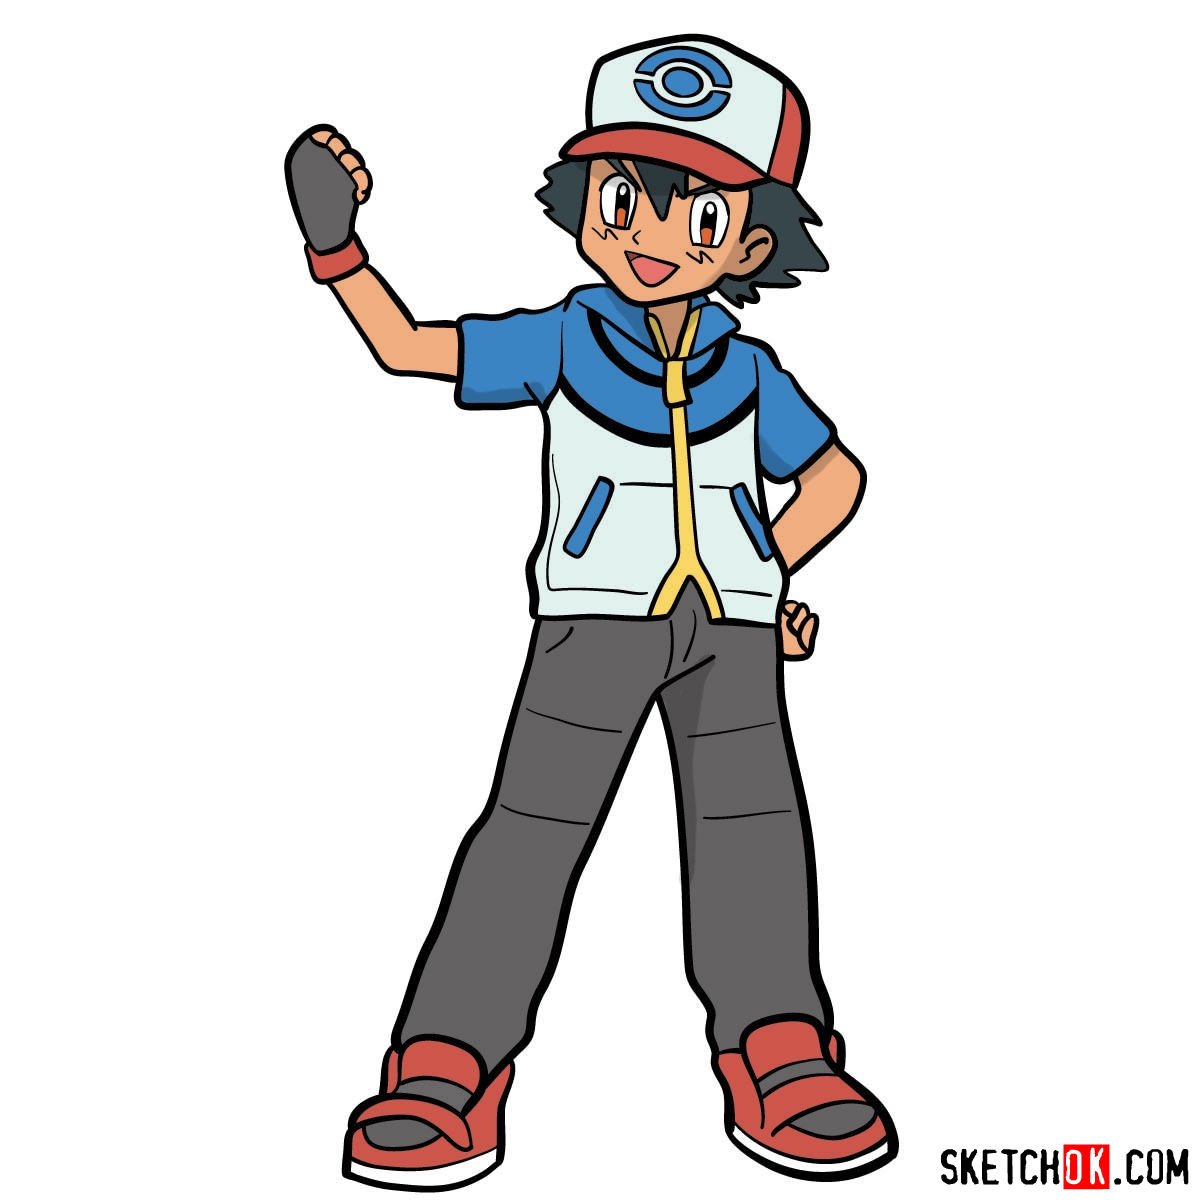 How to draw Ash from Pokemon anime